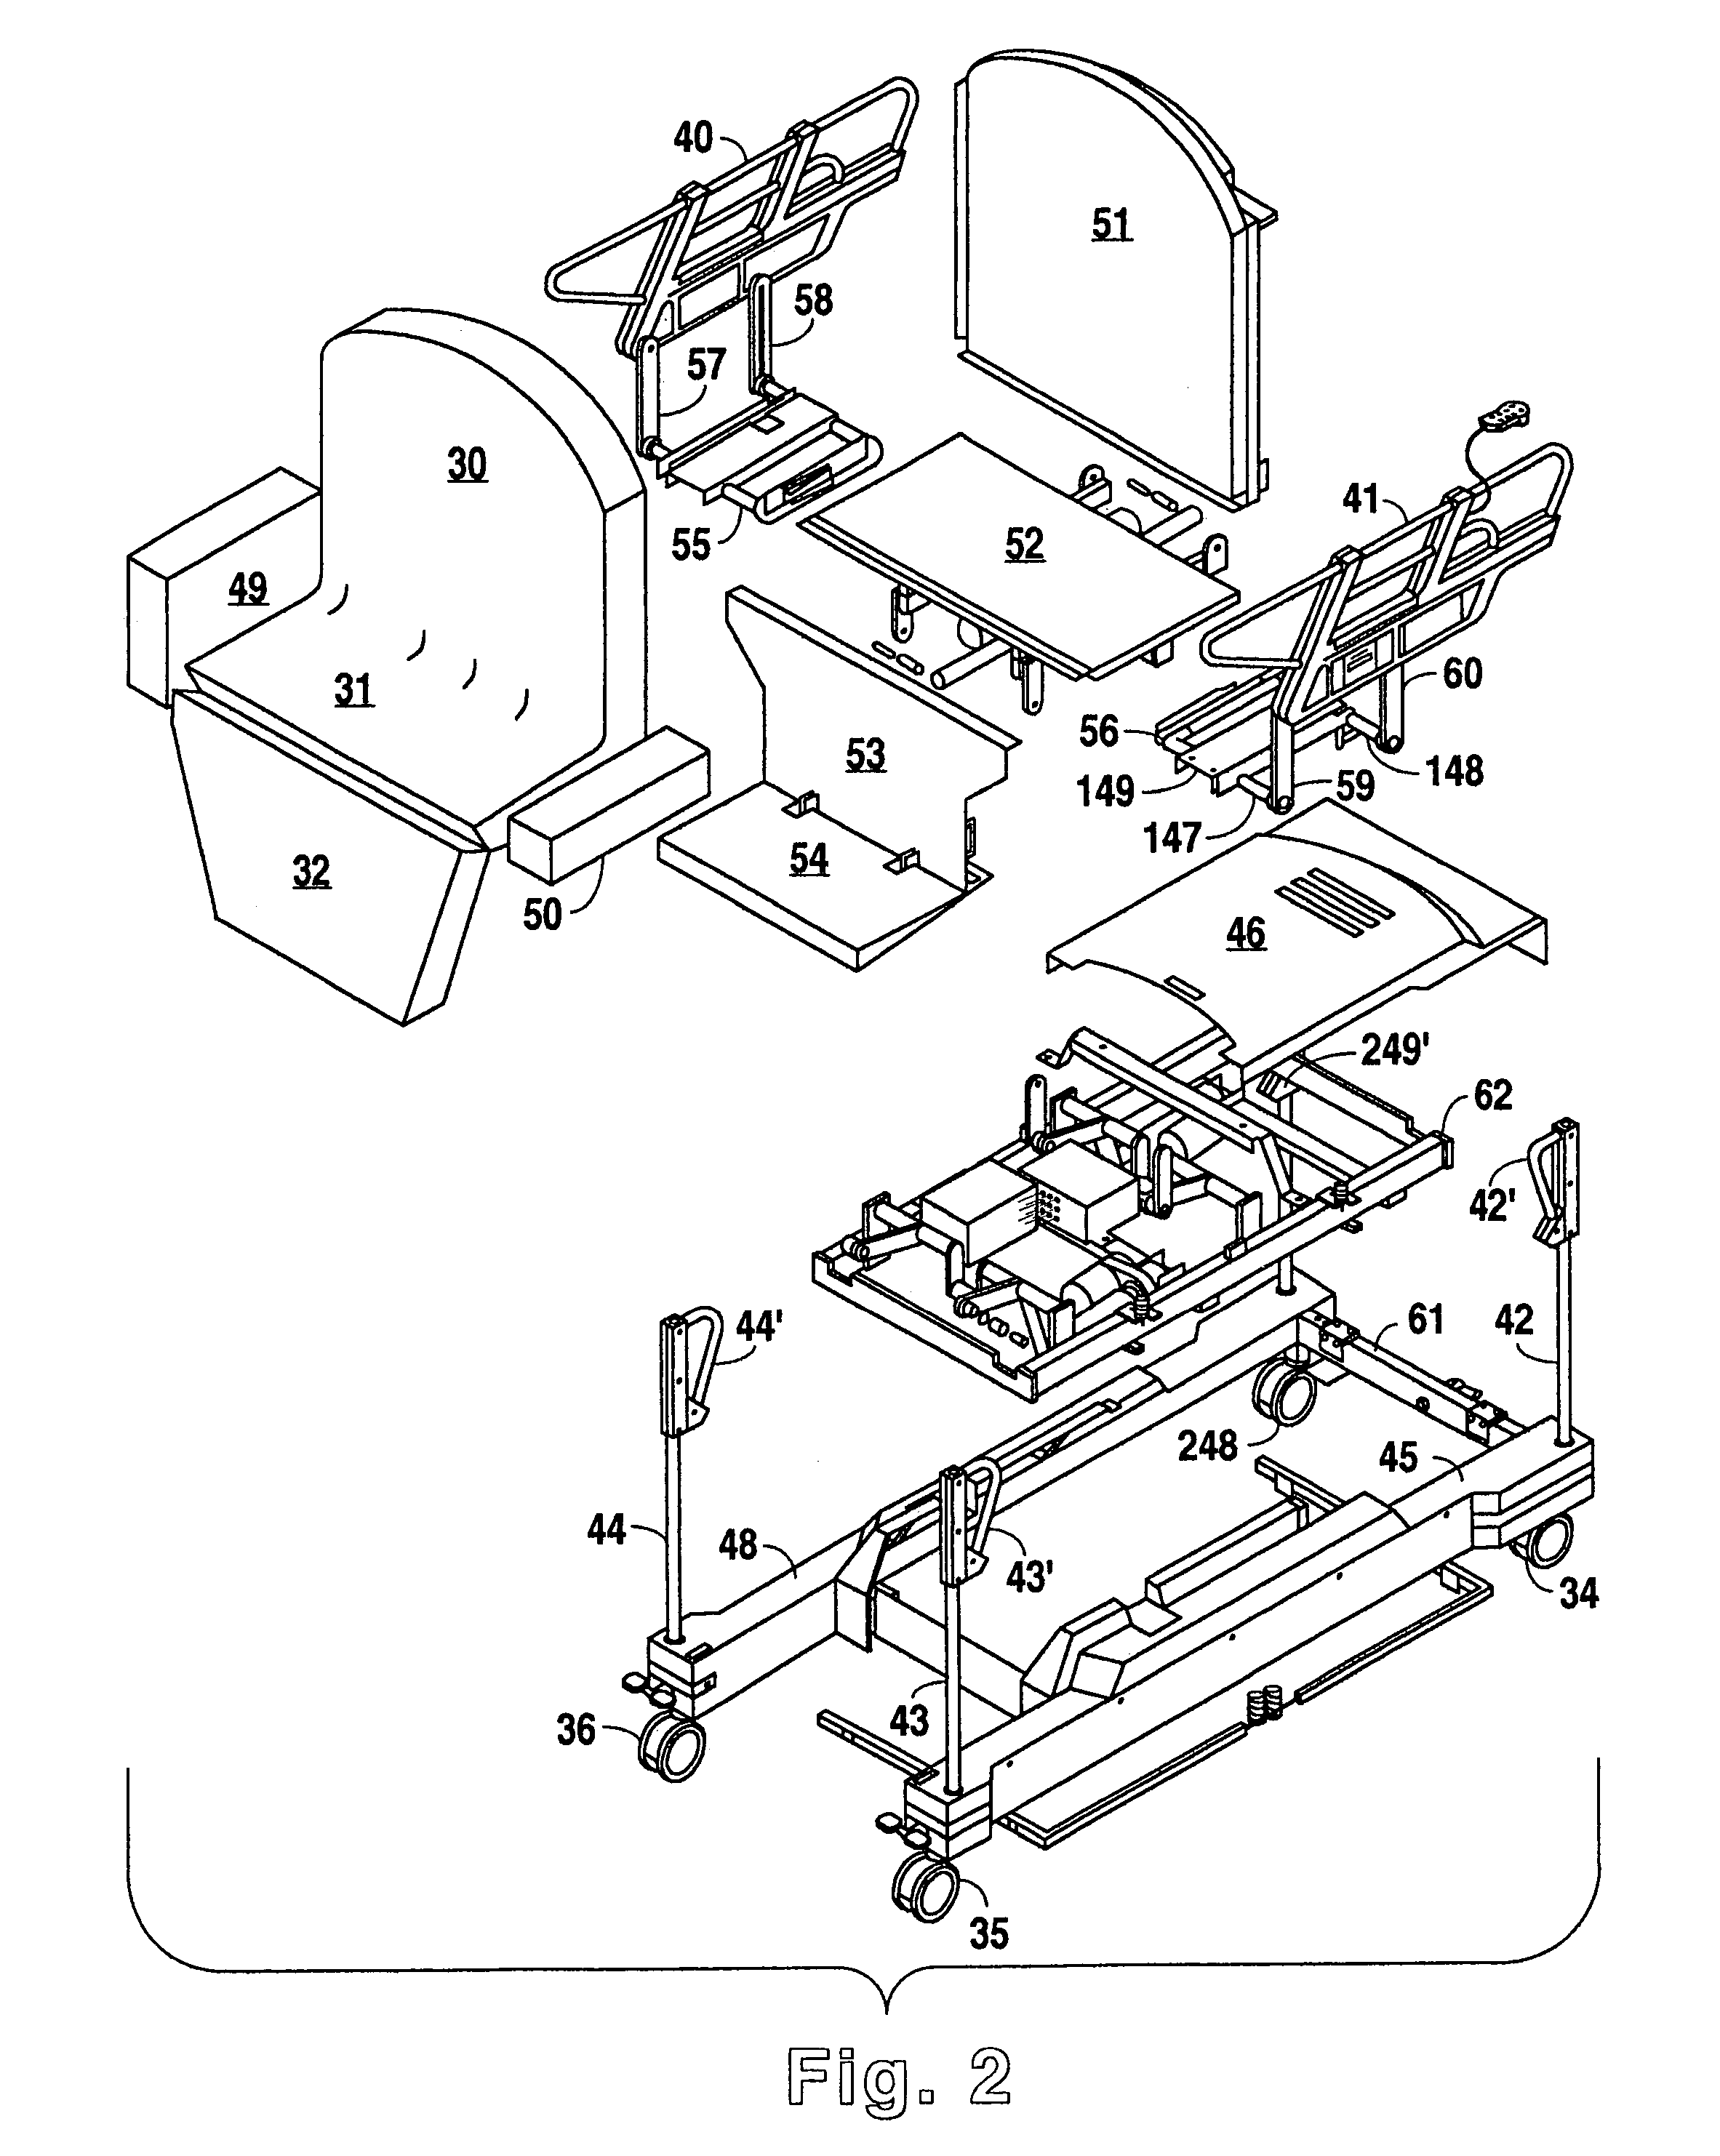 Bariatric bed apparatus and methods